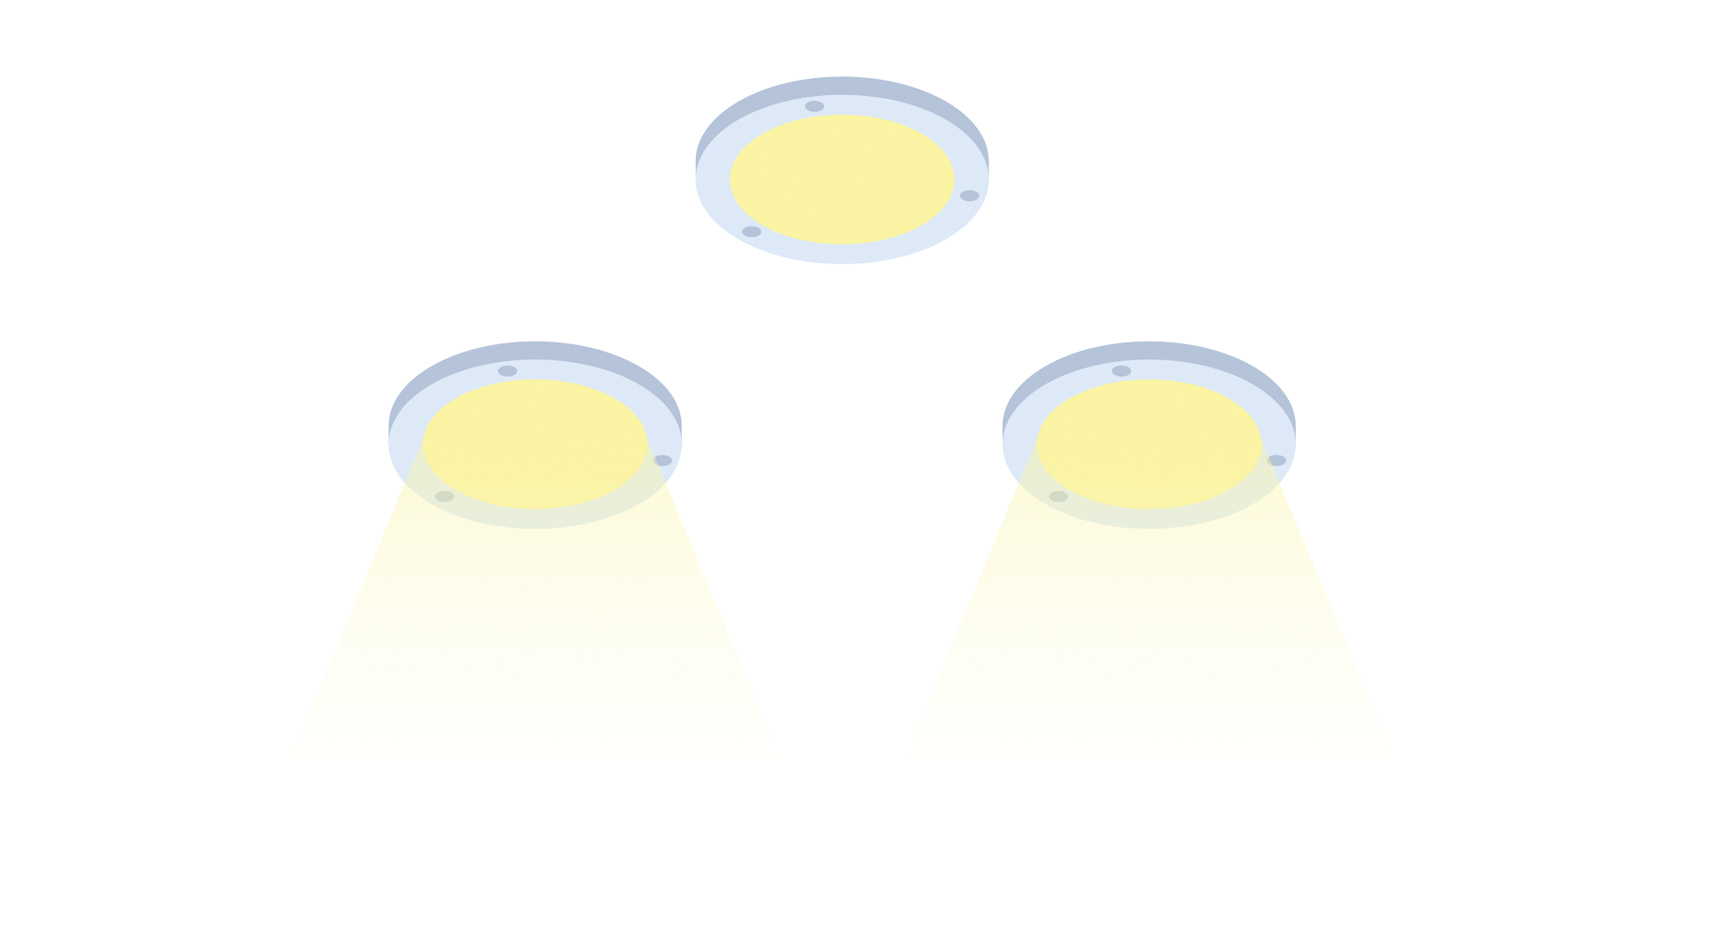 Cartoon image of sparkling downlights. Image: Getty